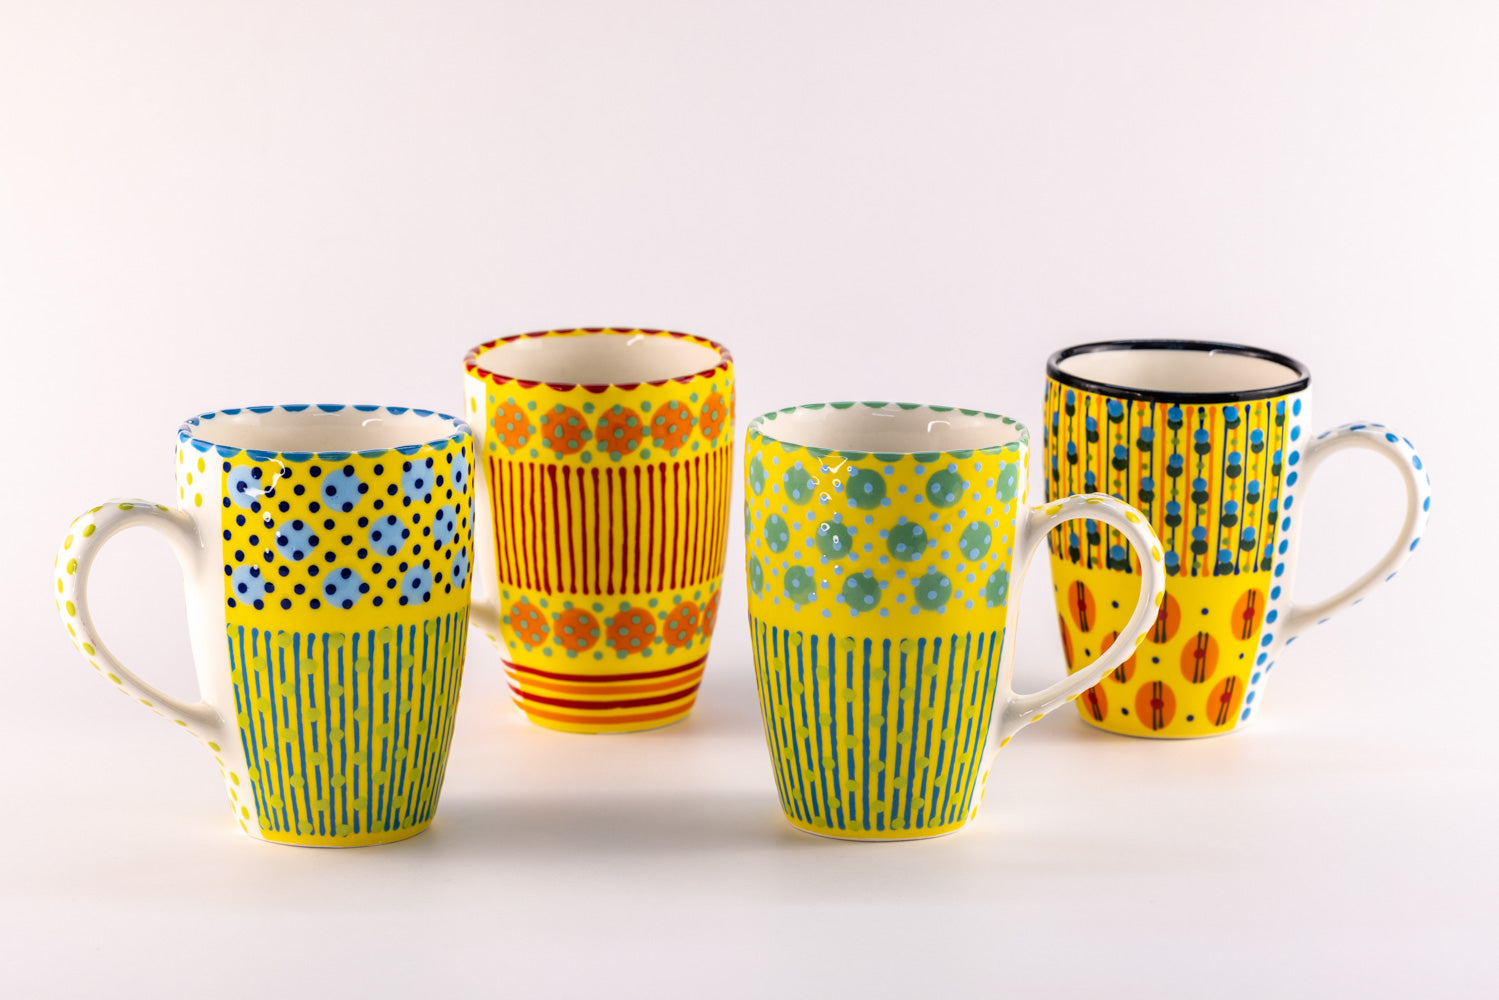 4 Very colorful coffee mugs with yellow base color. Topped with dots & stripes in turquoise, orange, green, light & indigo blue. Very fun!